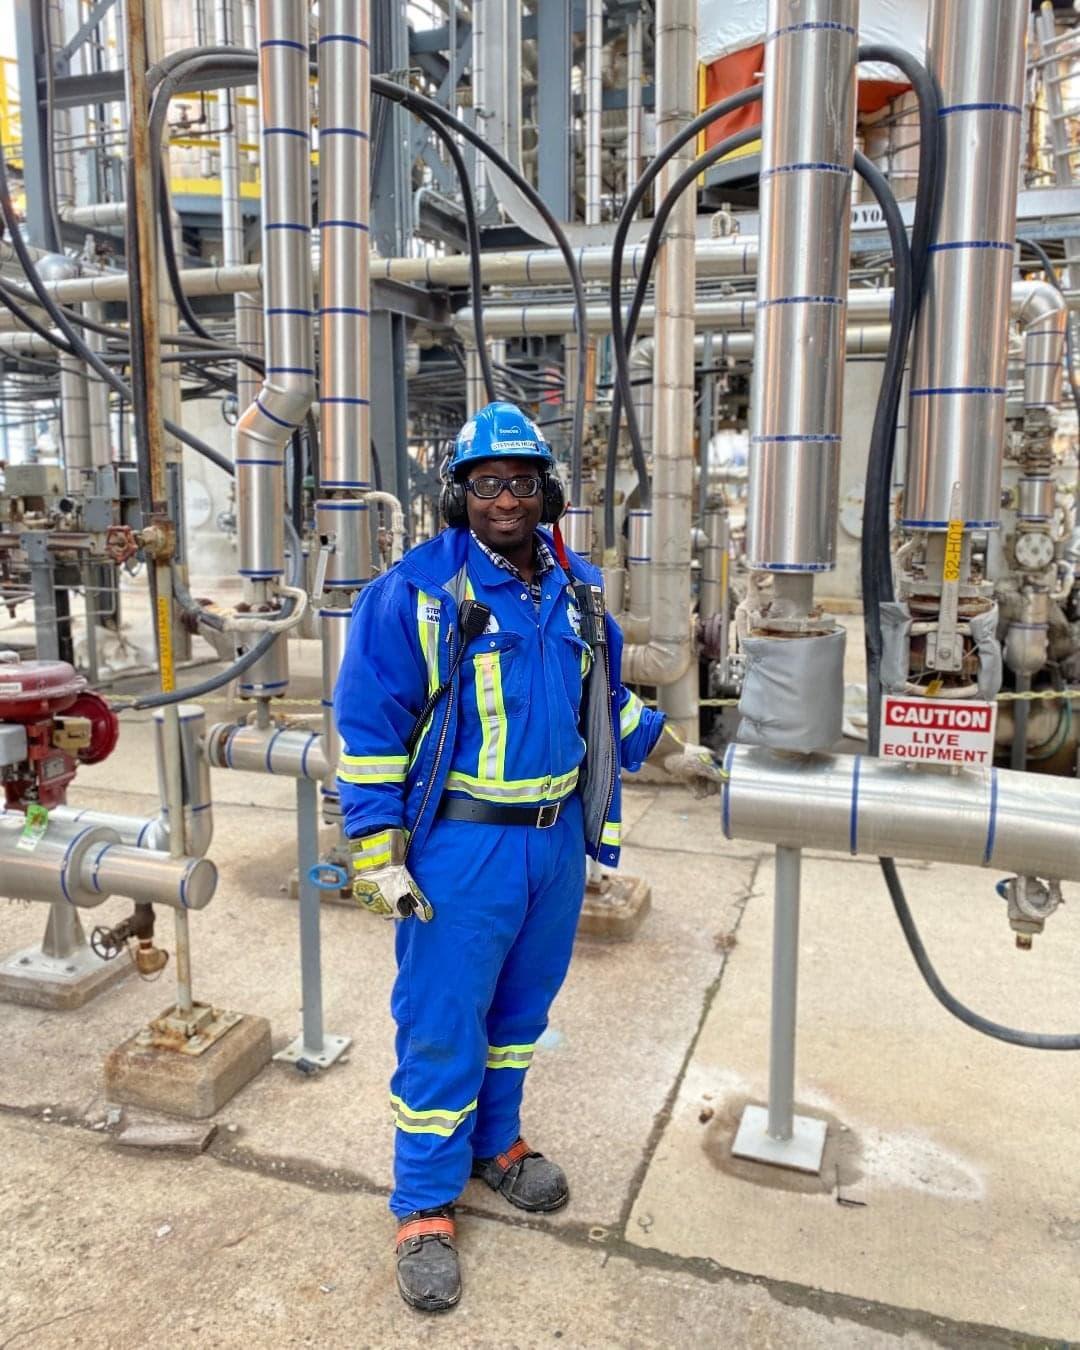 Stephen Muinda standing in an industrial complex, wearing protective clothing, hard hat, glasses, and ear muffs.